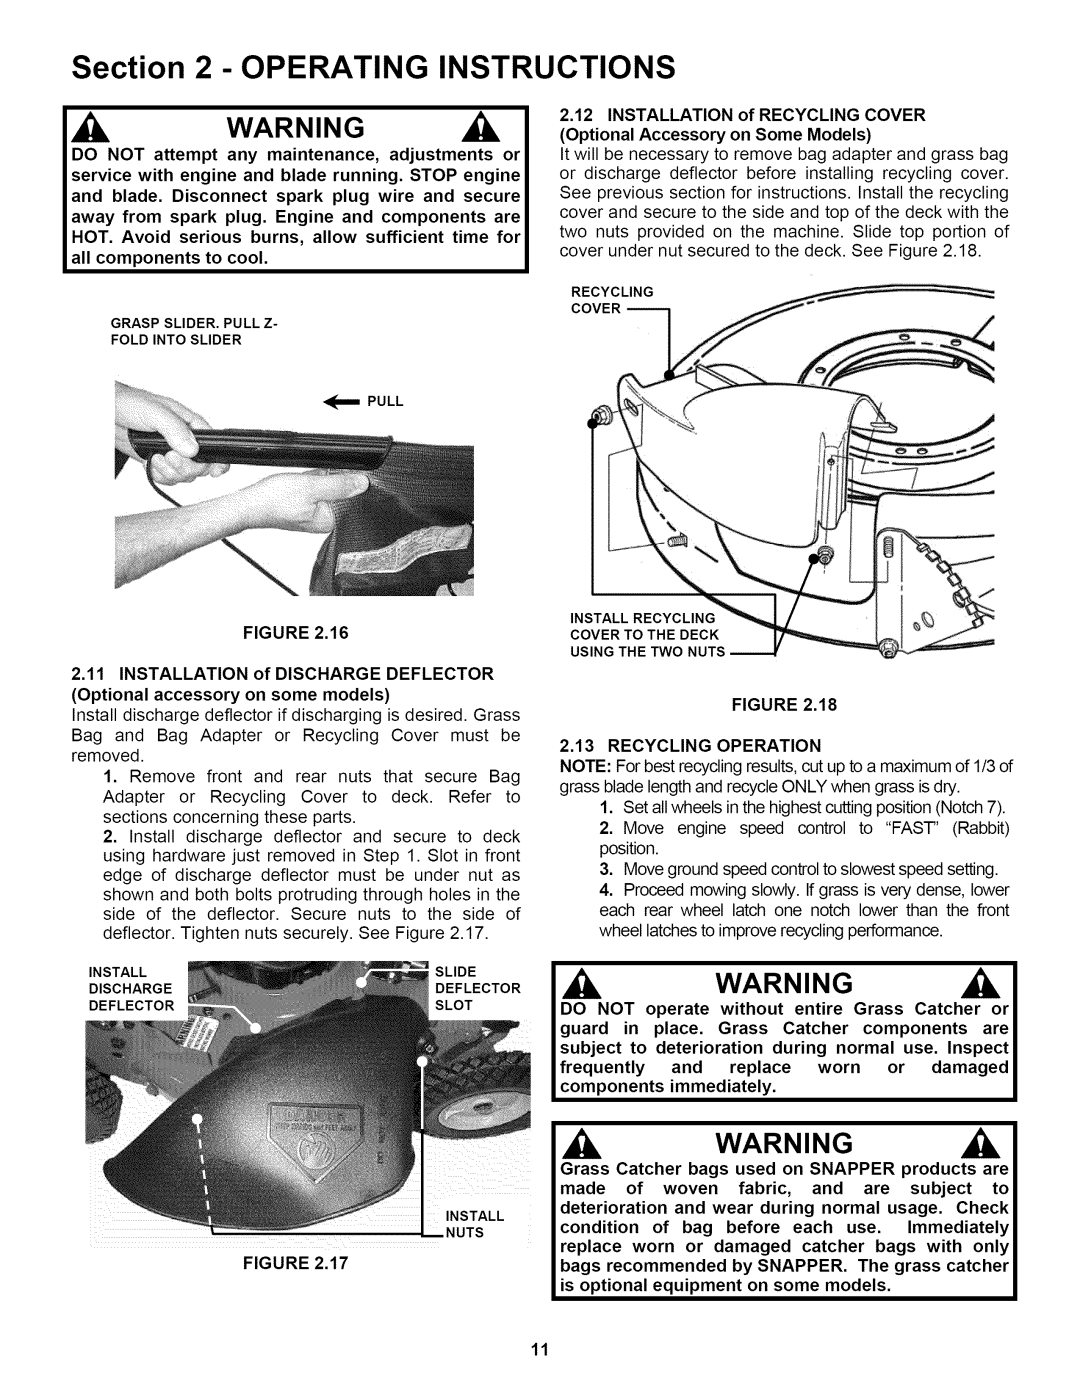 Snapper P216019KWV, P217019BVE, P2167519B important safety instructions Operatinginstructions, Figure, 13RECYCLING OPERATION 